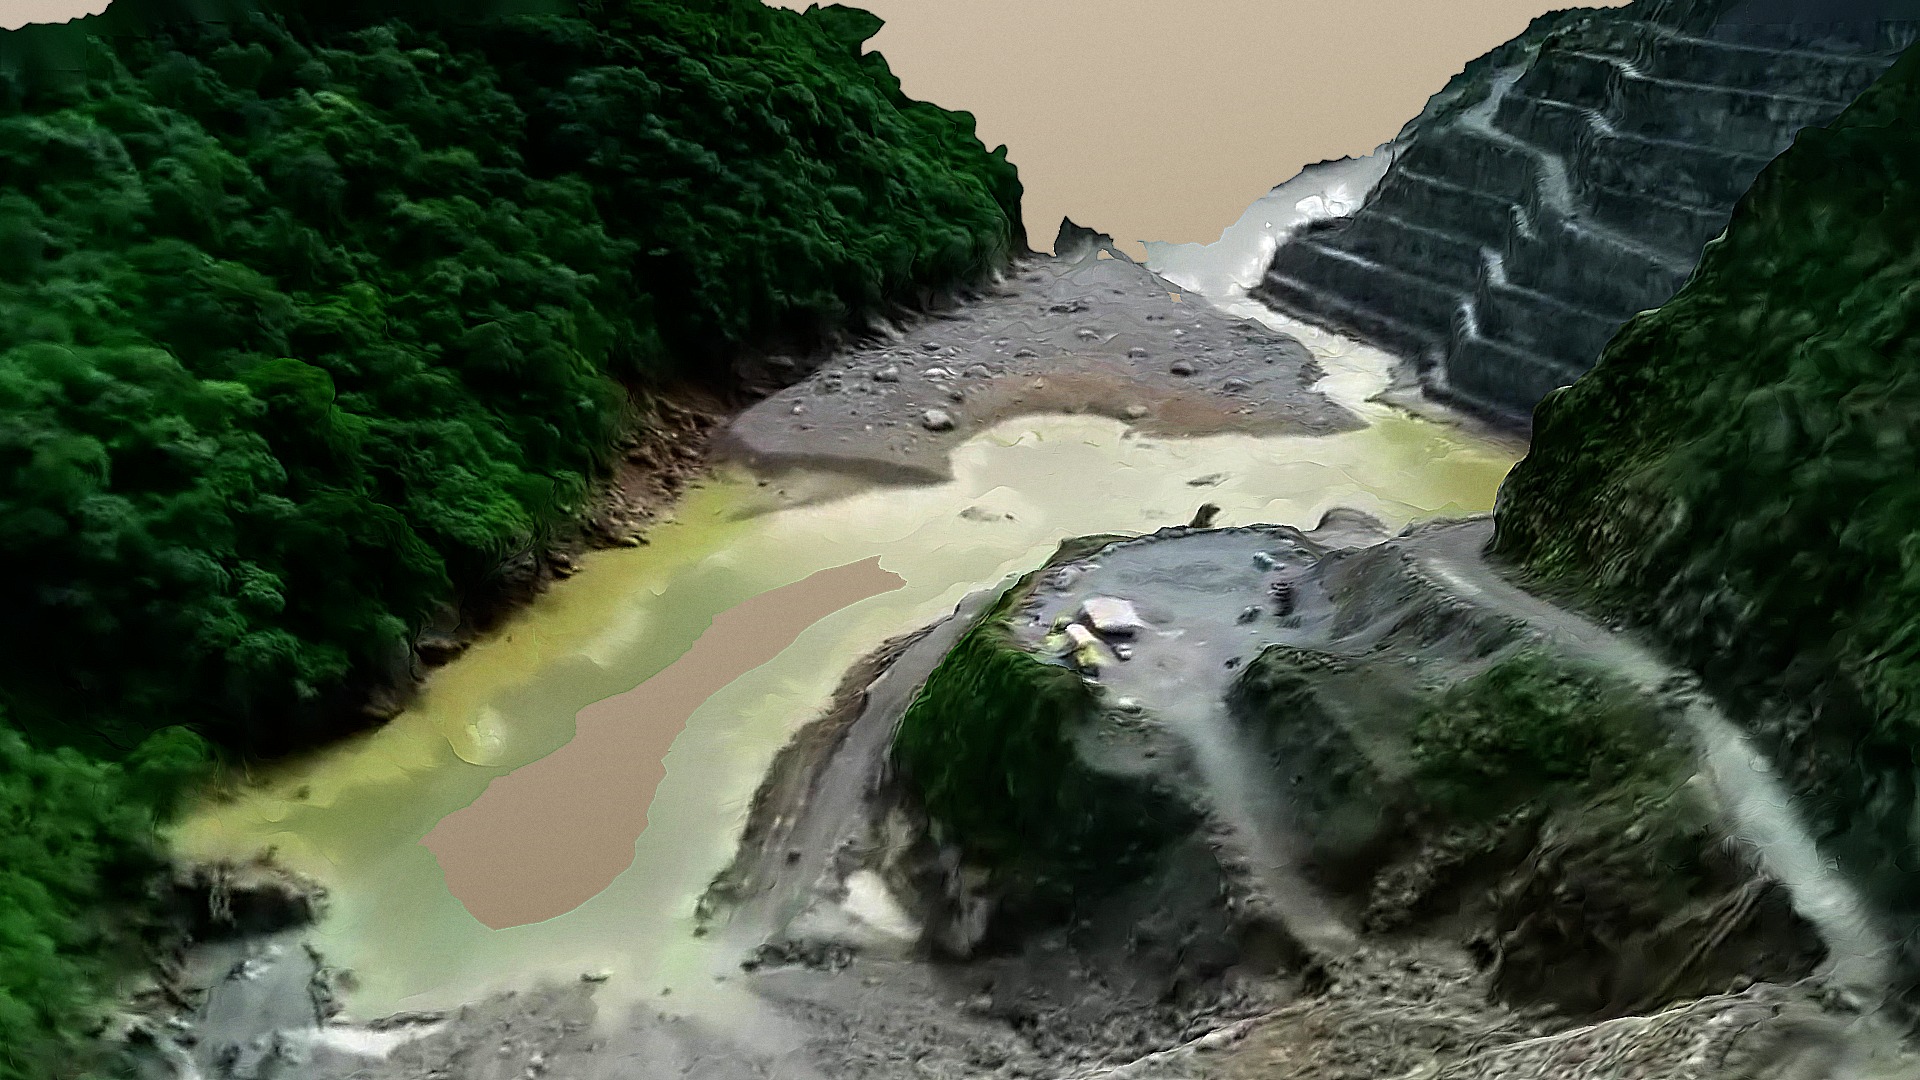 3D model Hidroituango hydroelectric power plant 052318 B - This is a 3D model of the Hidroituango hydroelectric power plant 052318 B. The 3D model is about a river with a waterfall.